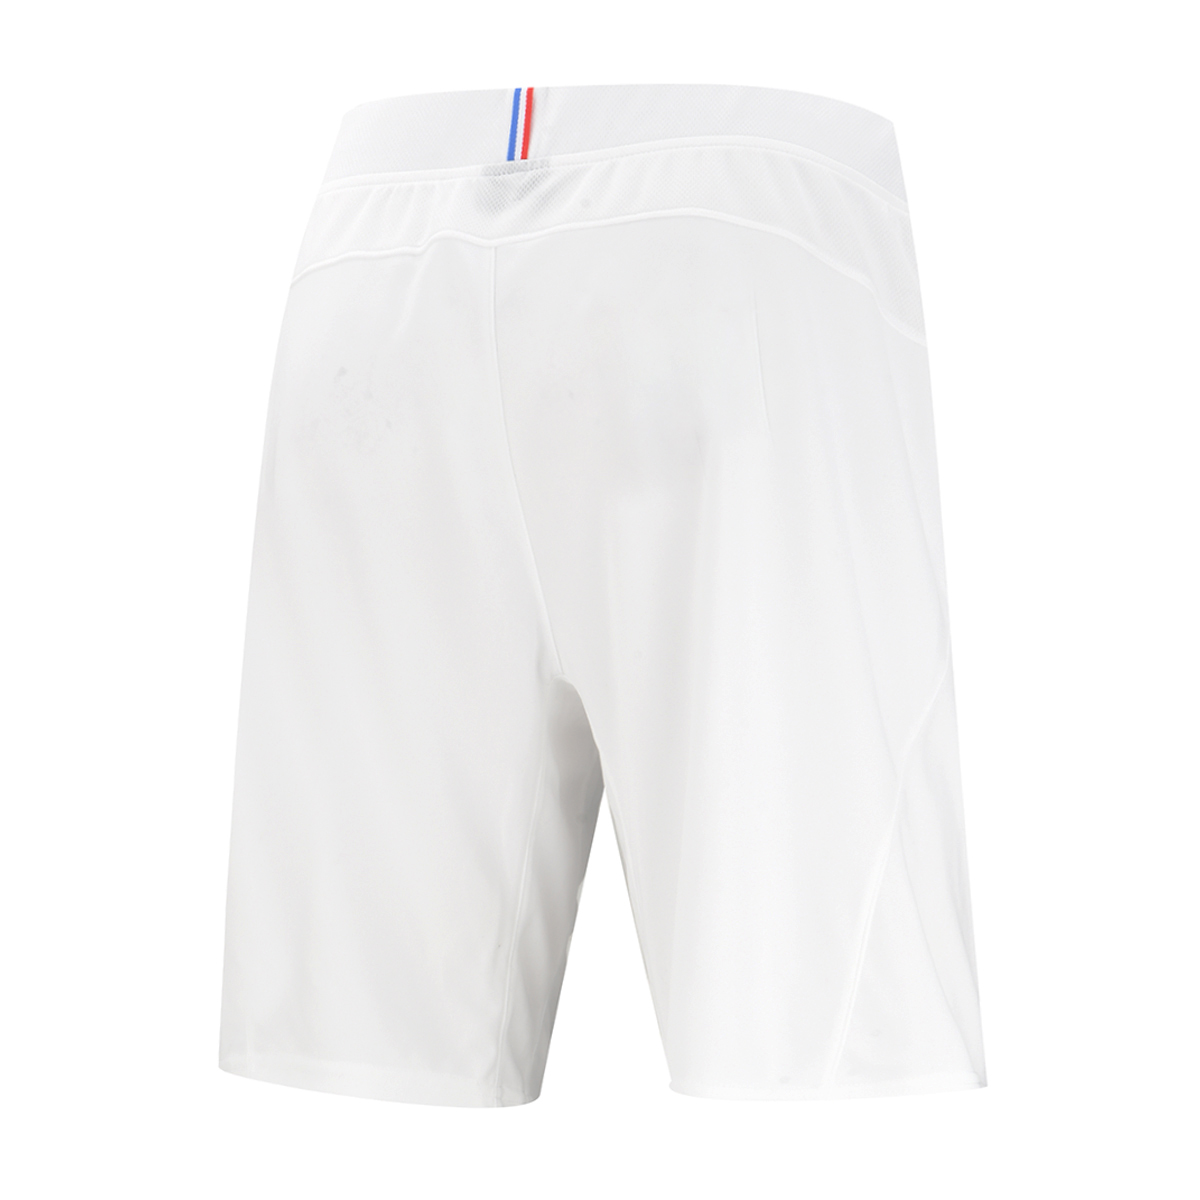 Short Tenis Le Coq Sportif New Optical N2 Hombre,  image number null